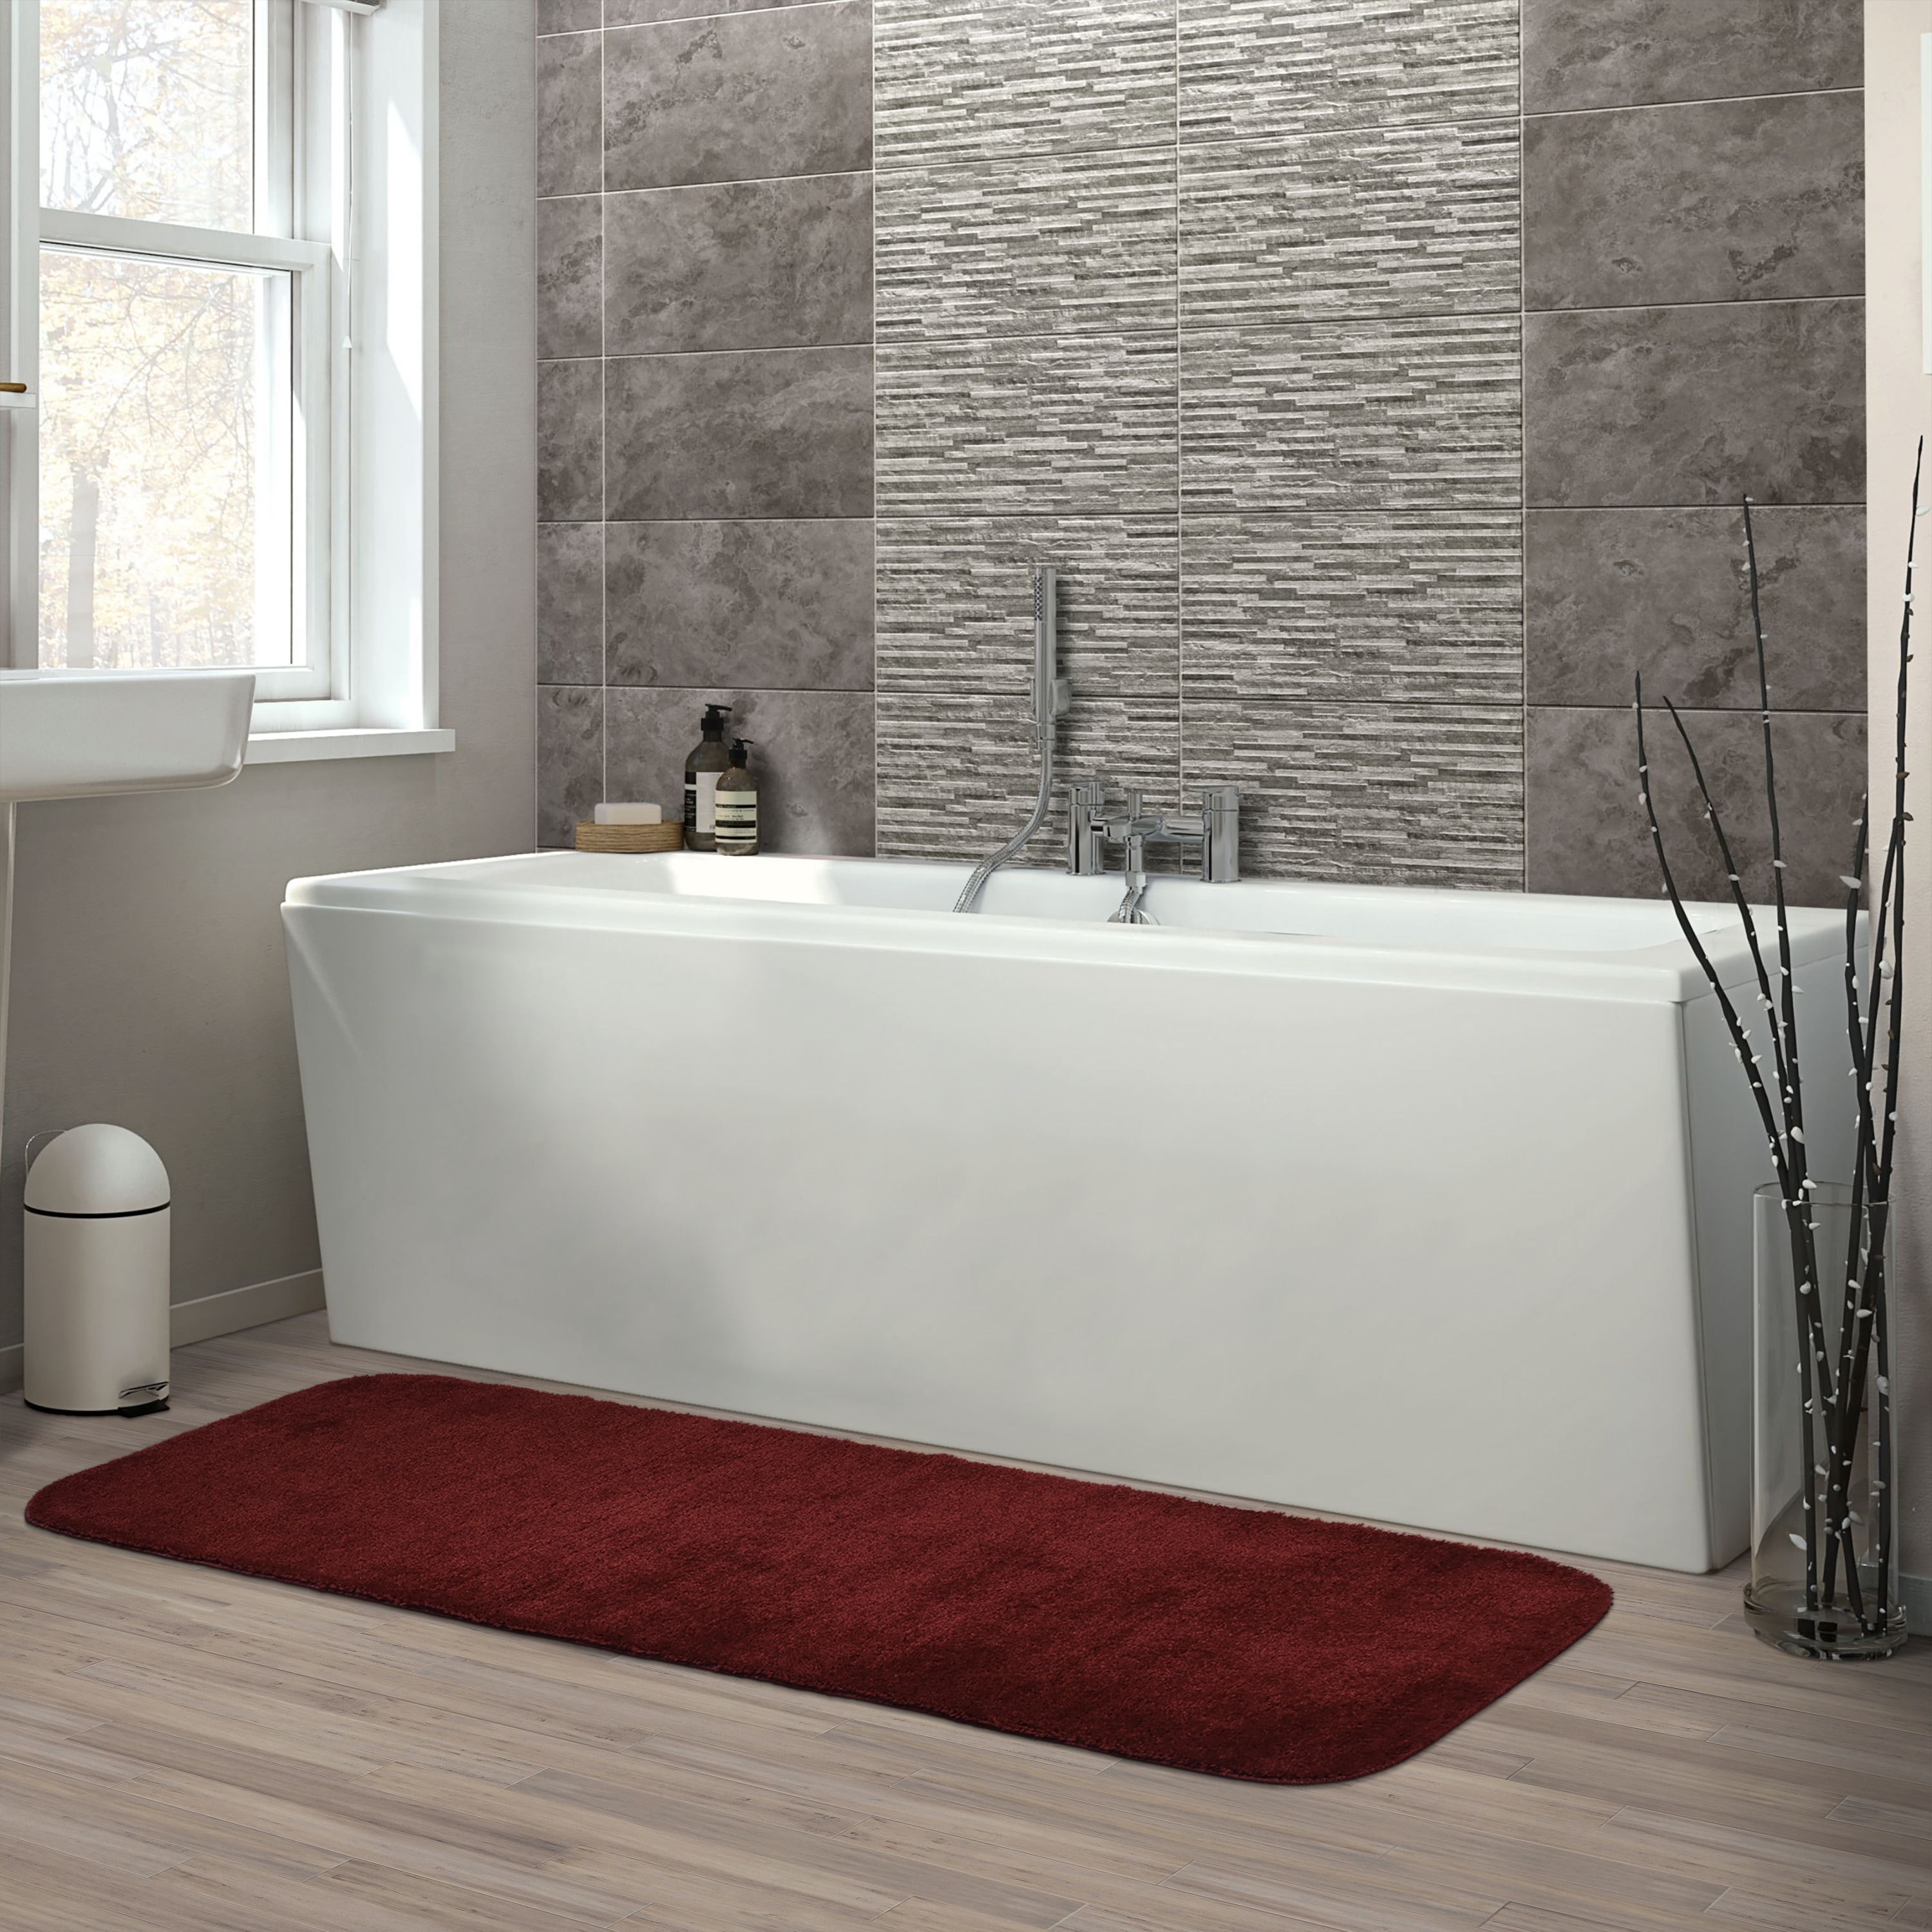 https://ak1.ostkcdn.com/images/products/is/images/direct/3a9951b16f5e4b7bee4fb2e2f9b3bcc3c4e02fc6/Traditional-Plush-Chili-Pepper-Red-Washable-Nylon-Bathroom-Rug.jpg